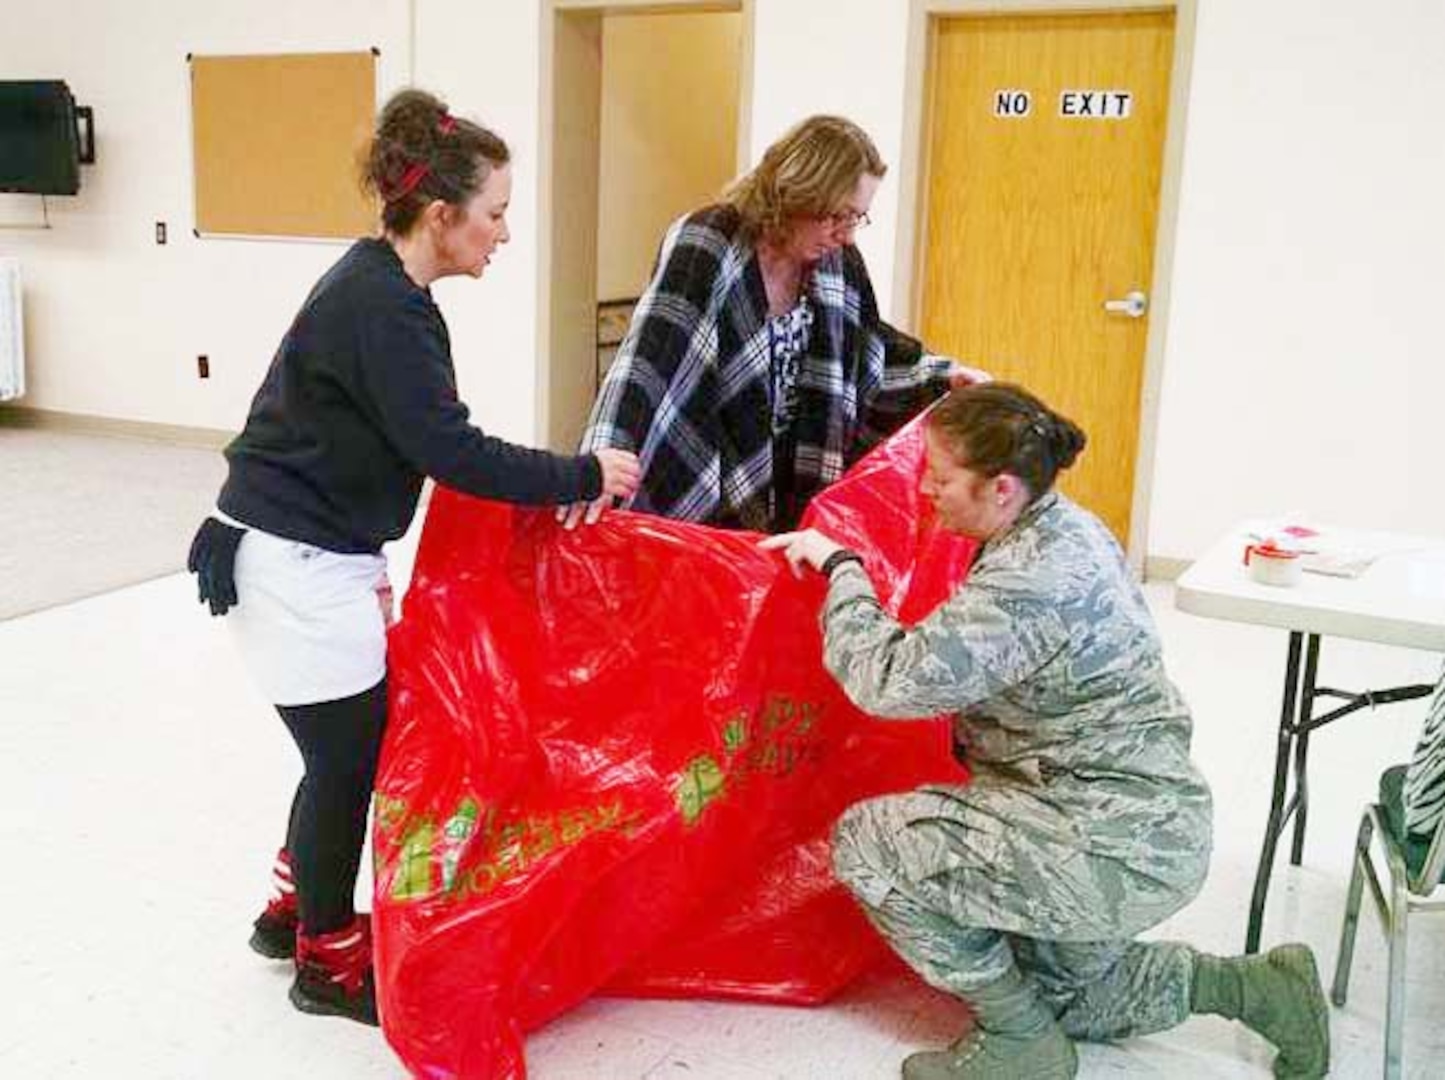 Defense Logistics Agency  Aviation employees Denise Buckley (right)  and Cathy Hopkins, along with Air Force Capt. Tiffany Sellers, bag a bicycle provided for a student receiving gifts from Bensley Elementary School’s annual Angel Tree program Dec. 16, 2015.  DLA employees at Defense Supply Center Richmond, Virginia, adopted and provided gifts for 112 students in need from four local schools.